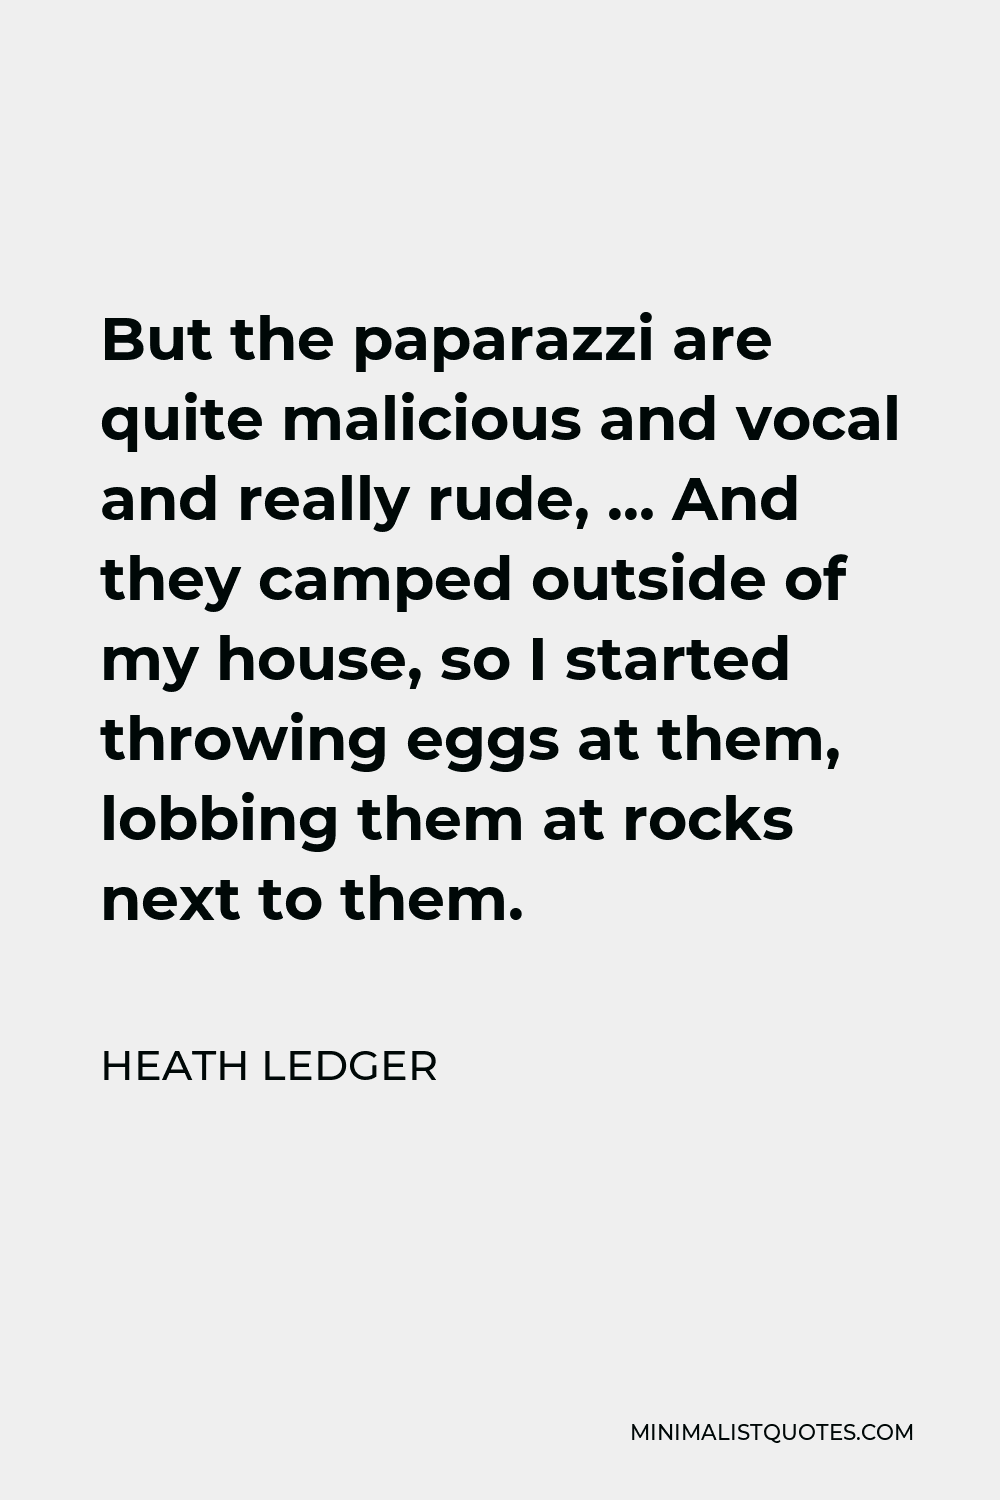 Heath Ledger Quote - But the paparazzi are quite malicious and vocal and really rude, … And they camped outside of my house, so I started throwing eggs at them, lobbing them at rocks next to them.